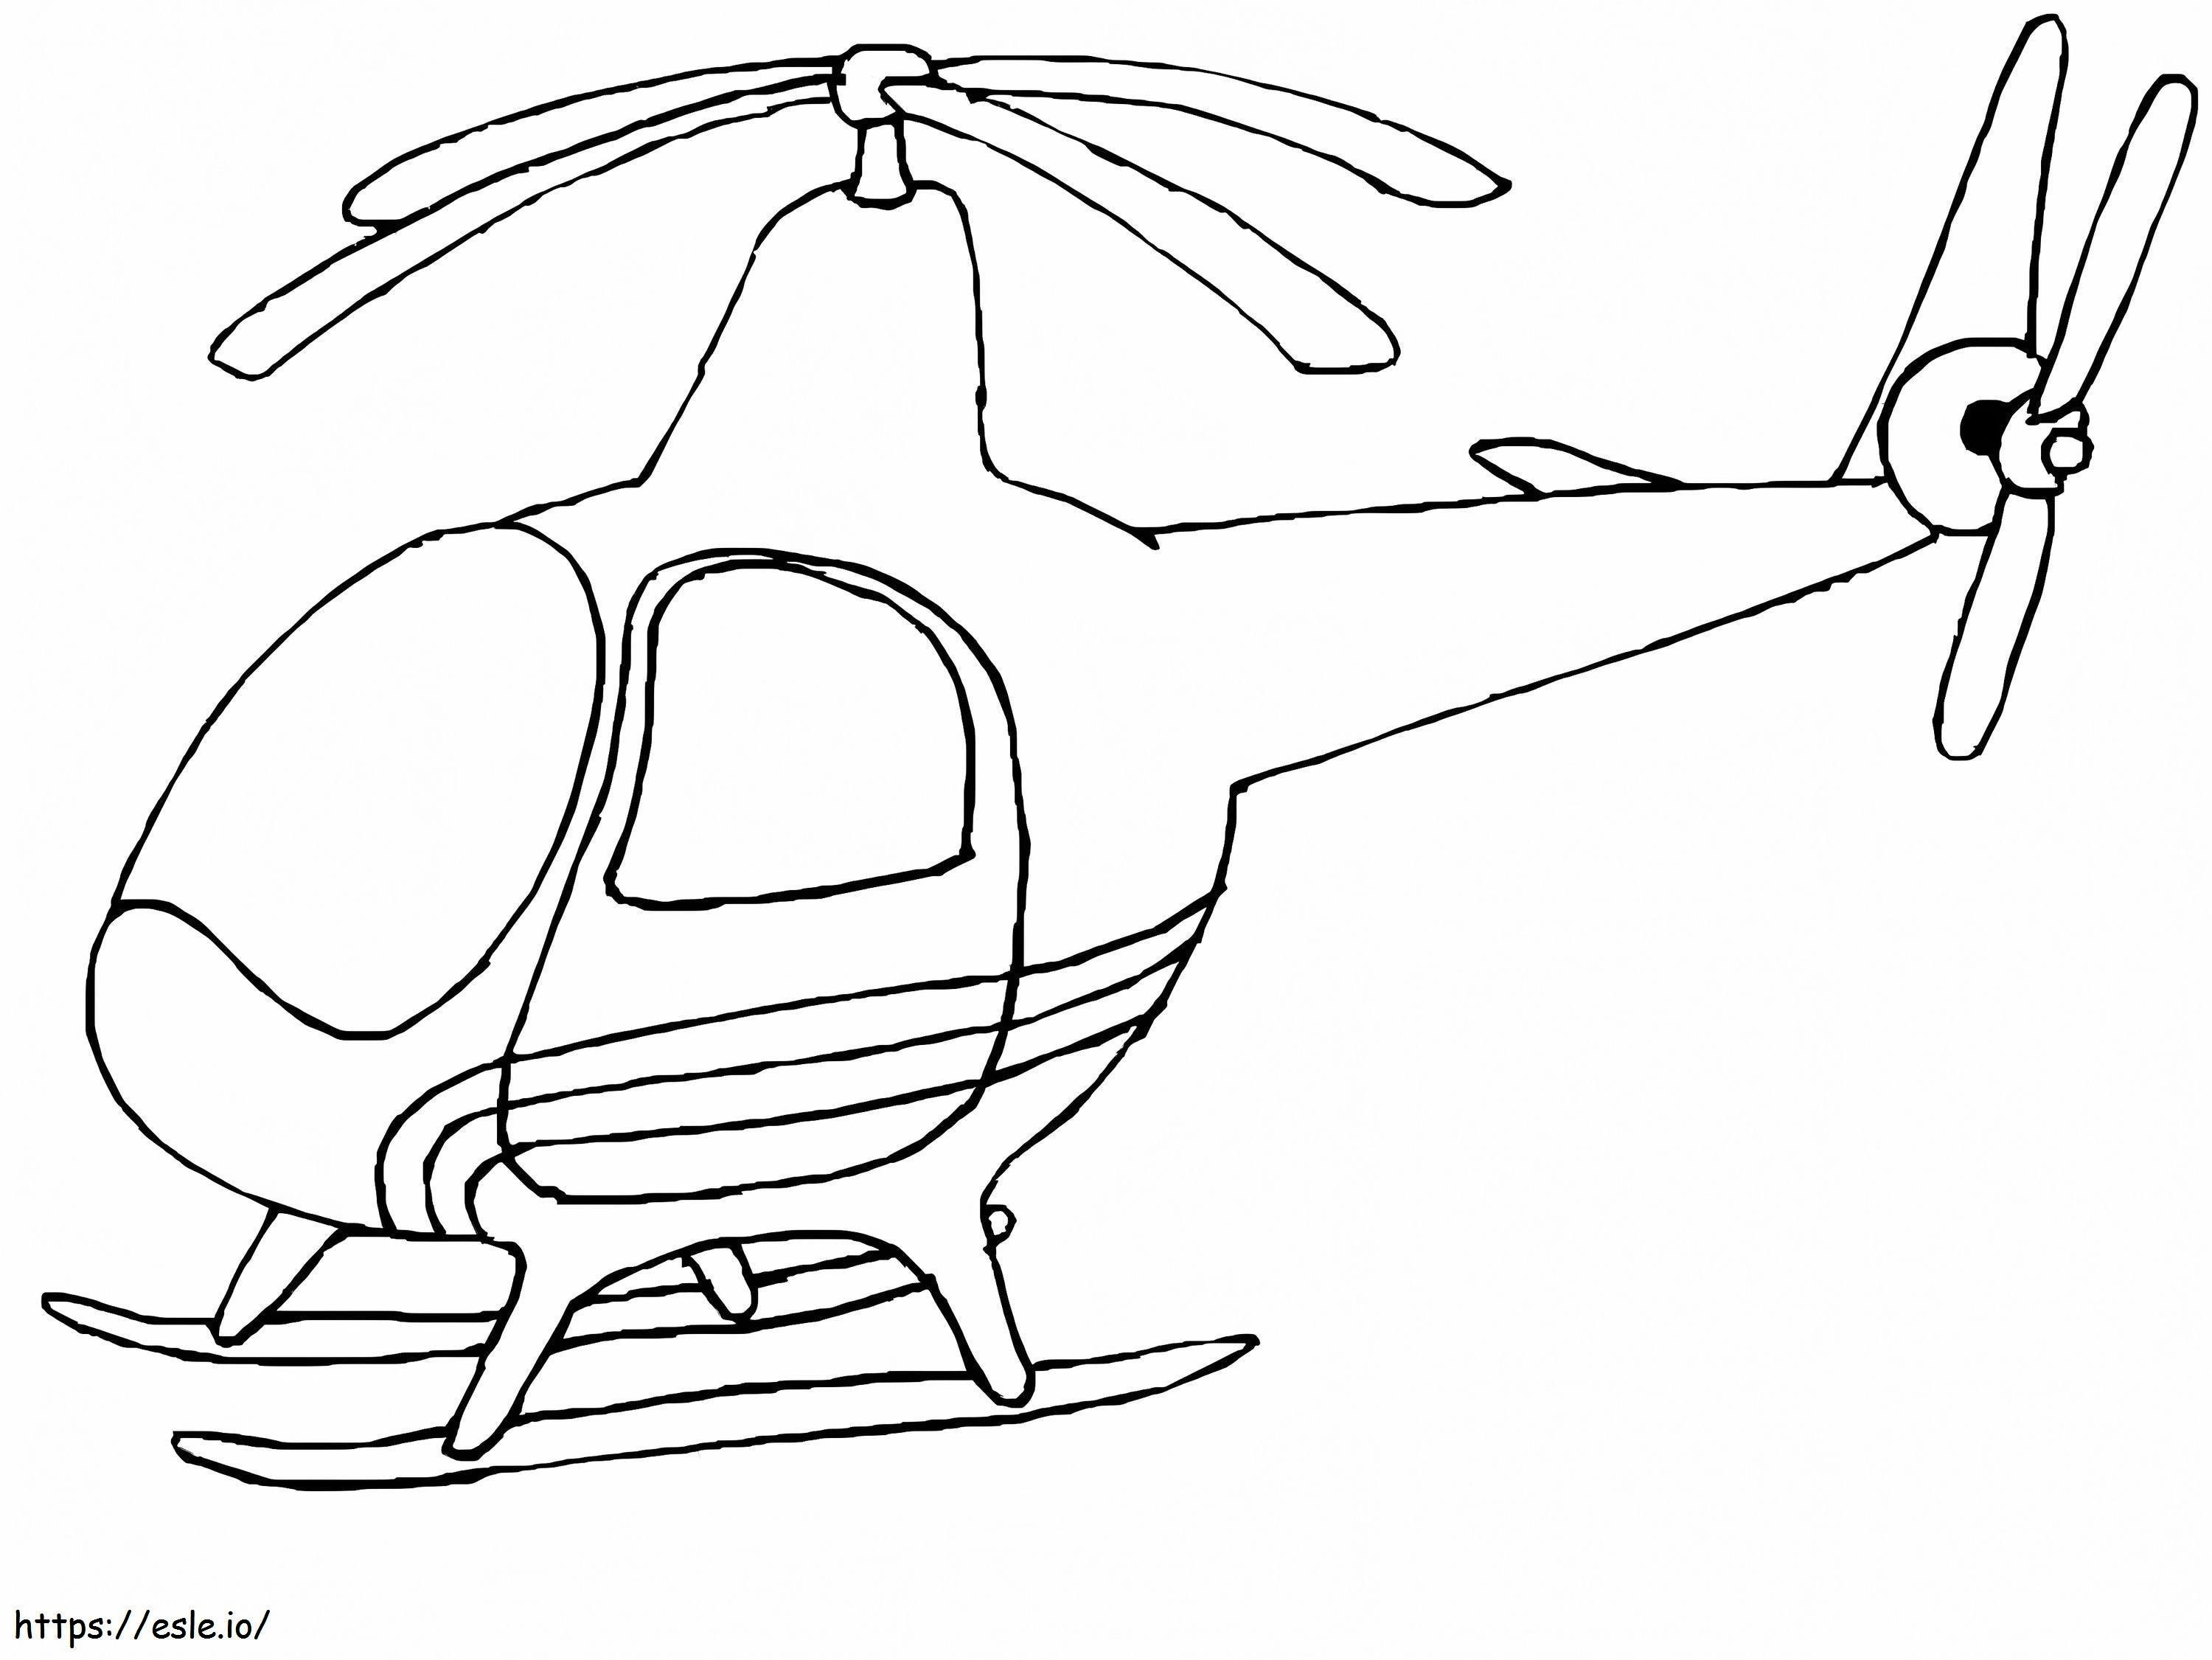 Normal Helicopter 2 coloring page